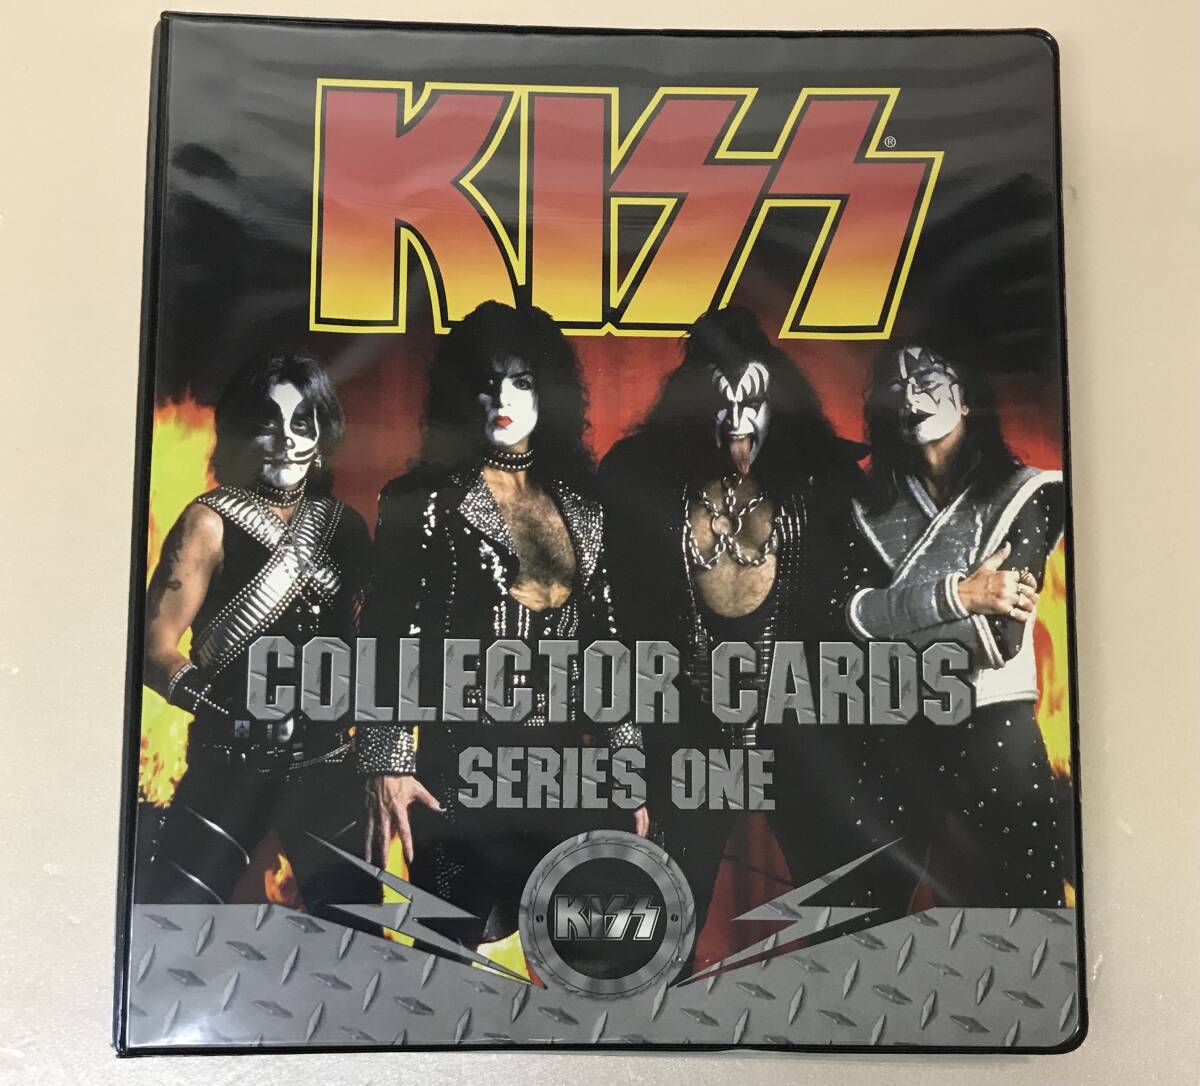 KISSkisCOLLECTOR CARDS SERIES 1 ONE trading card 185 sheets...h-2550